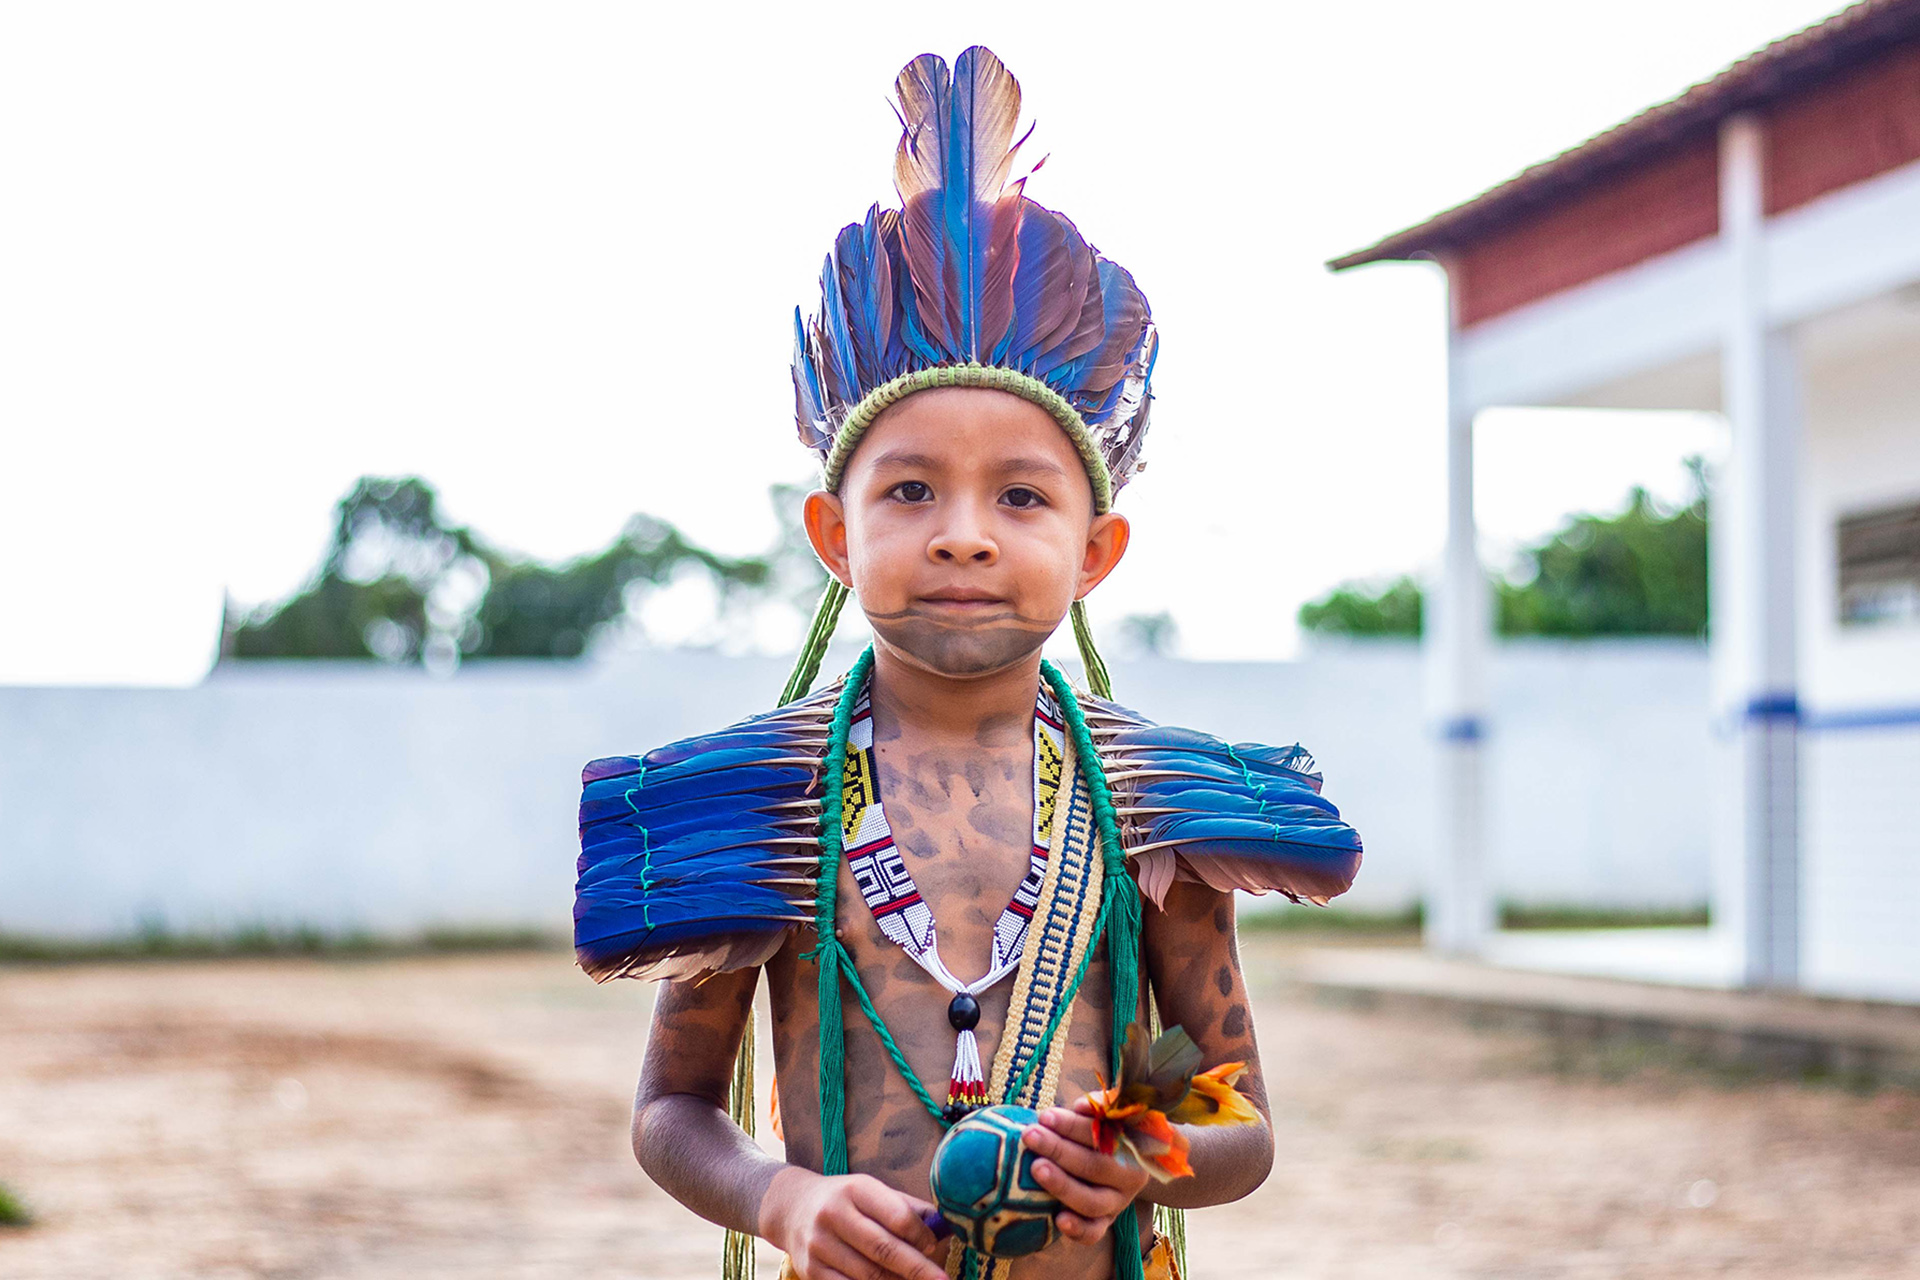 Eight-year-old Kaio, from the indigenous Guajajara tribe in Brazil